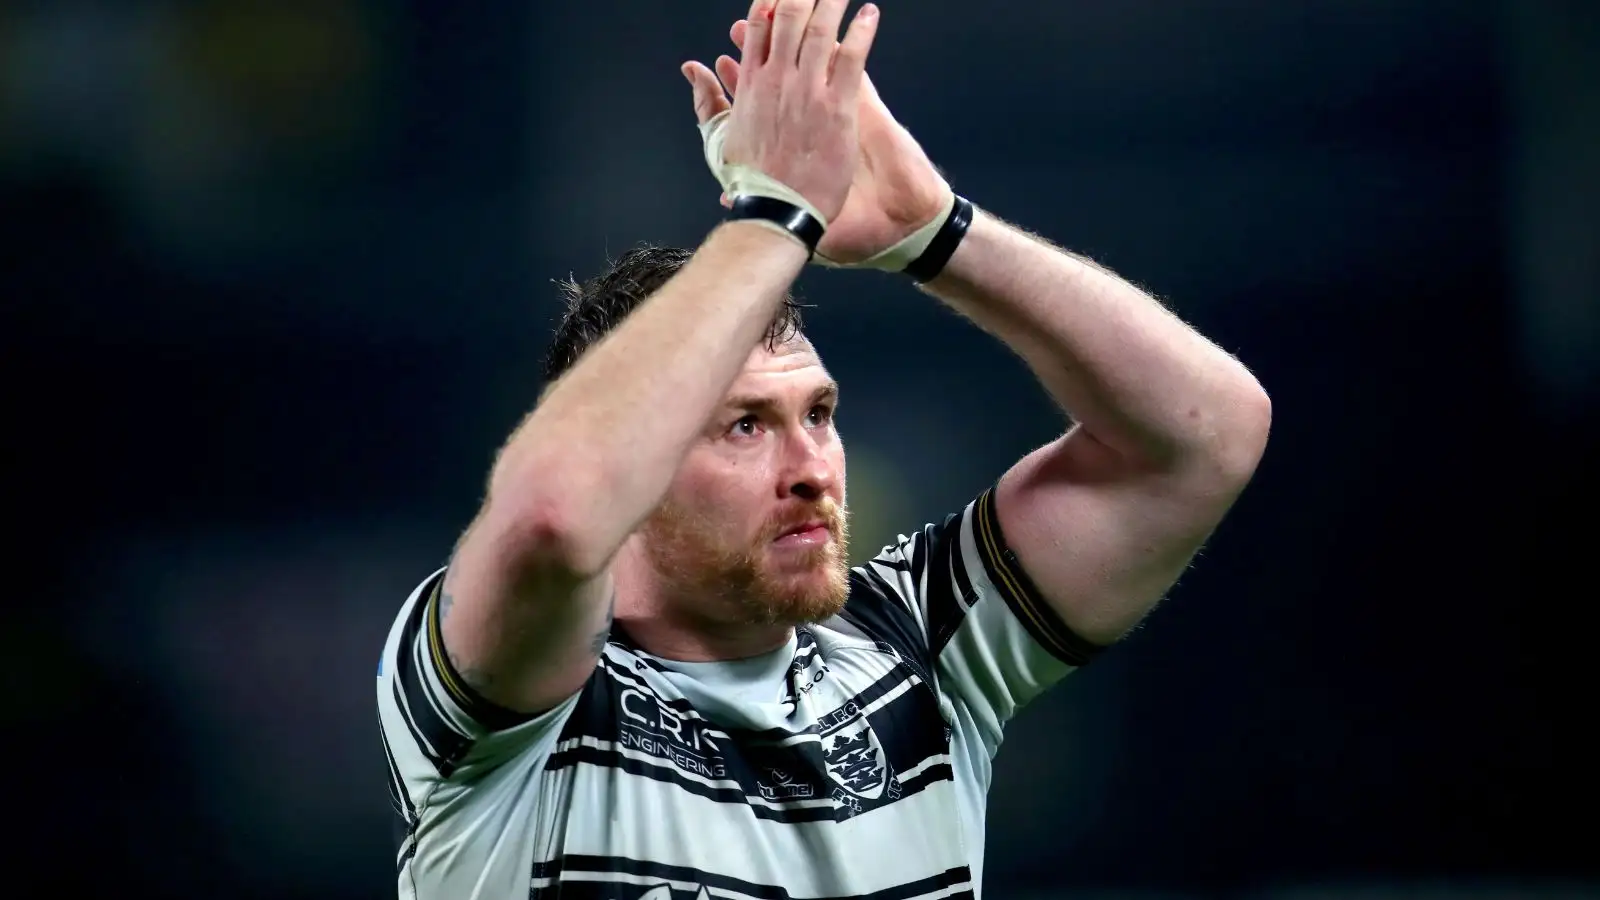 Hull FC prop Scott Taylor to hang up his boots at end of season: ‘I have given it everything and can retire with no regrets’